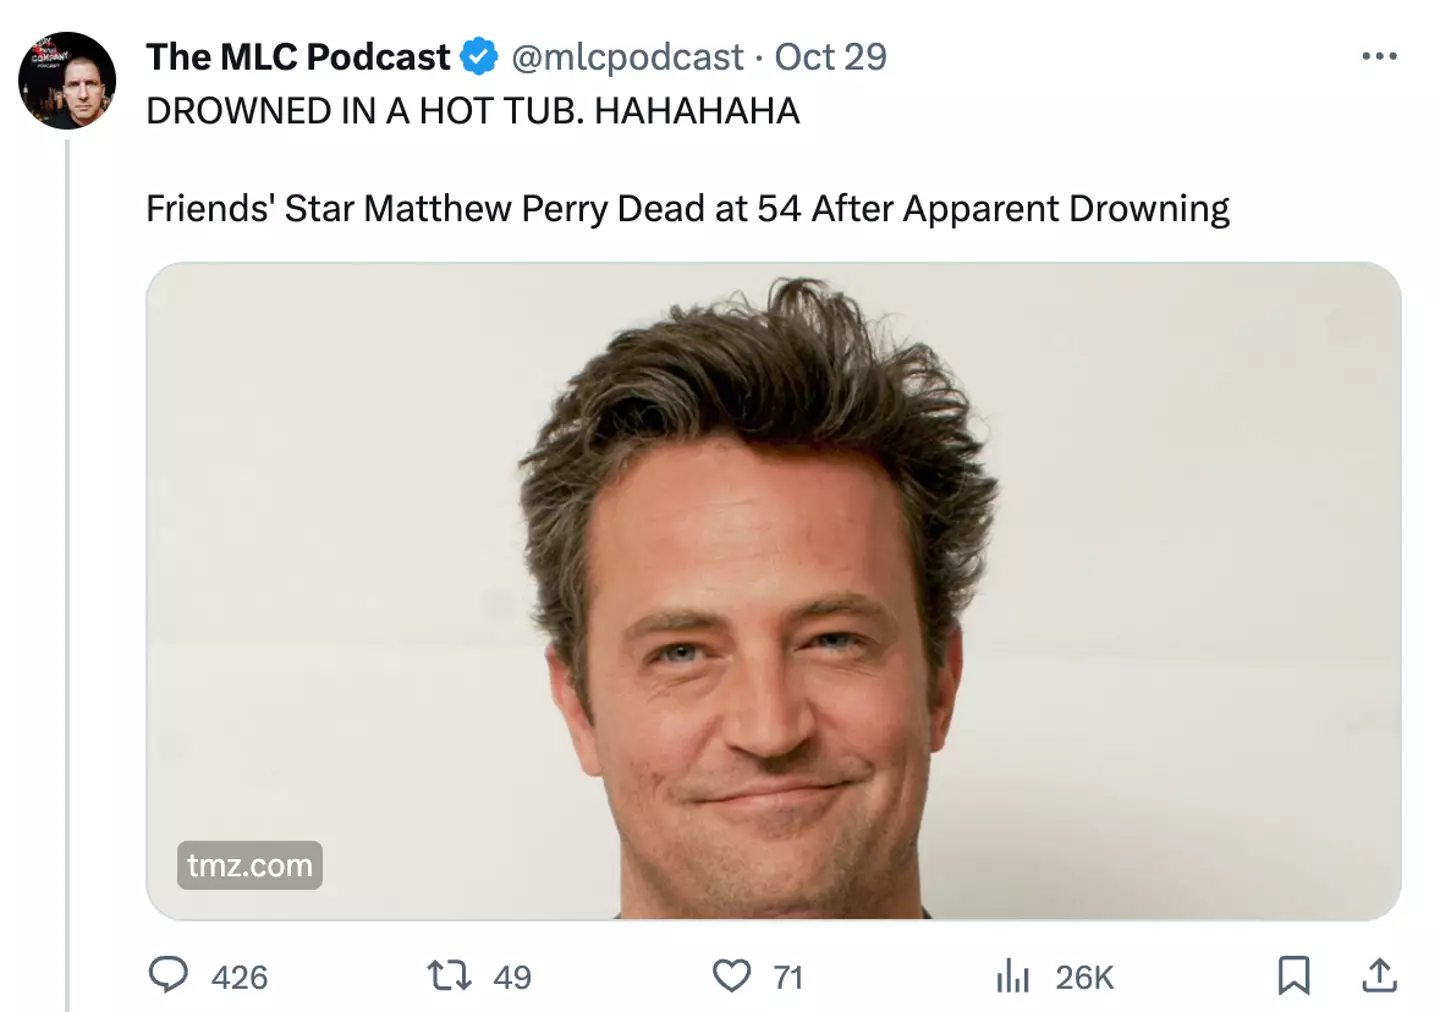 Ex SNL writer Kevin Brennan tweeted about Matthew Perry's passing.